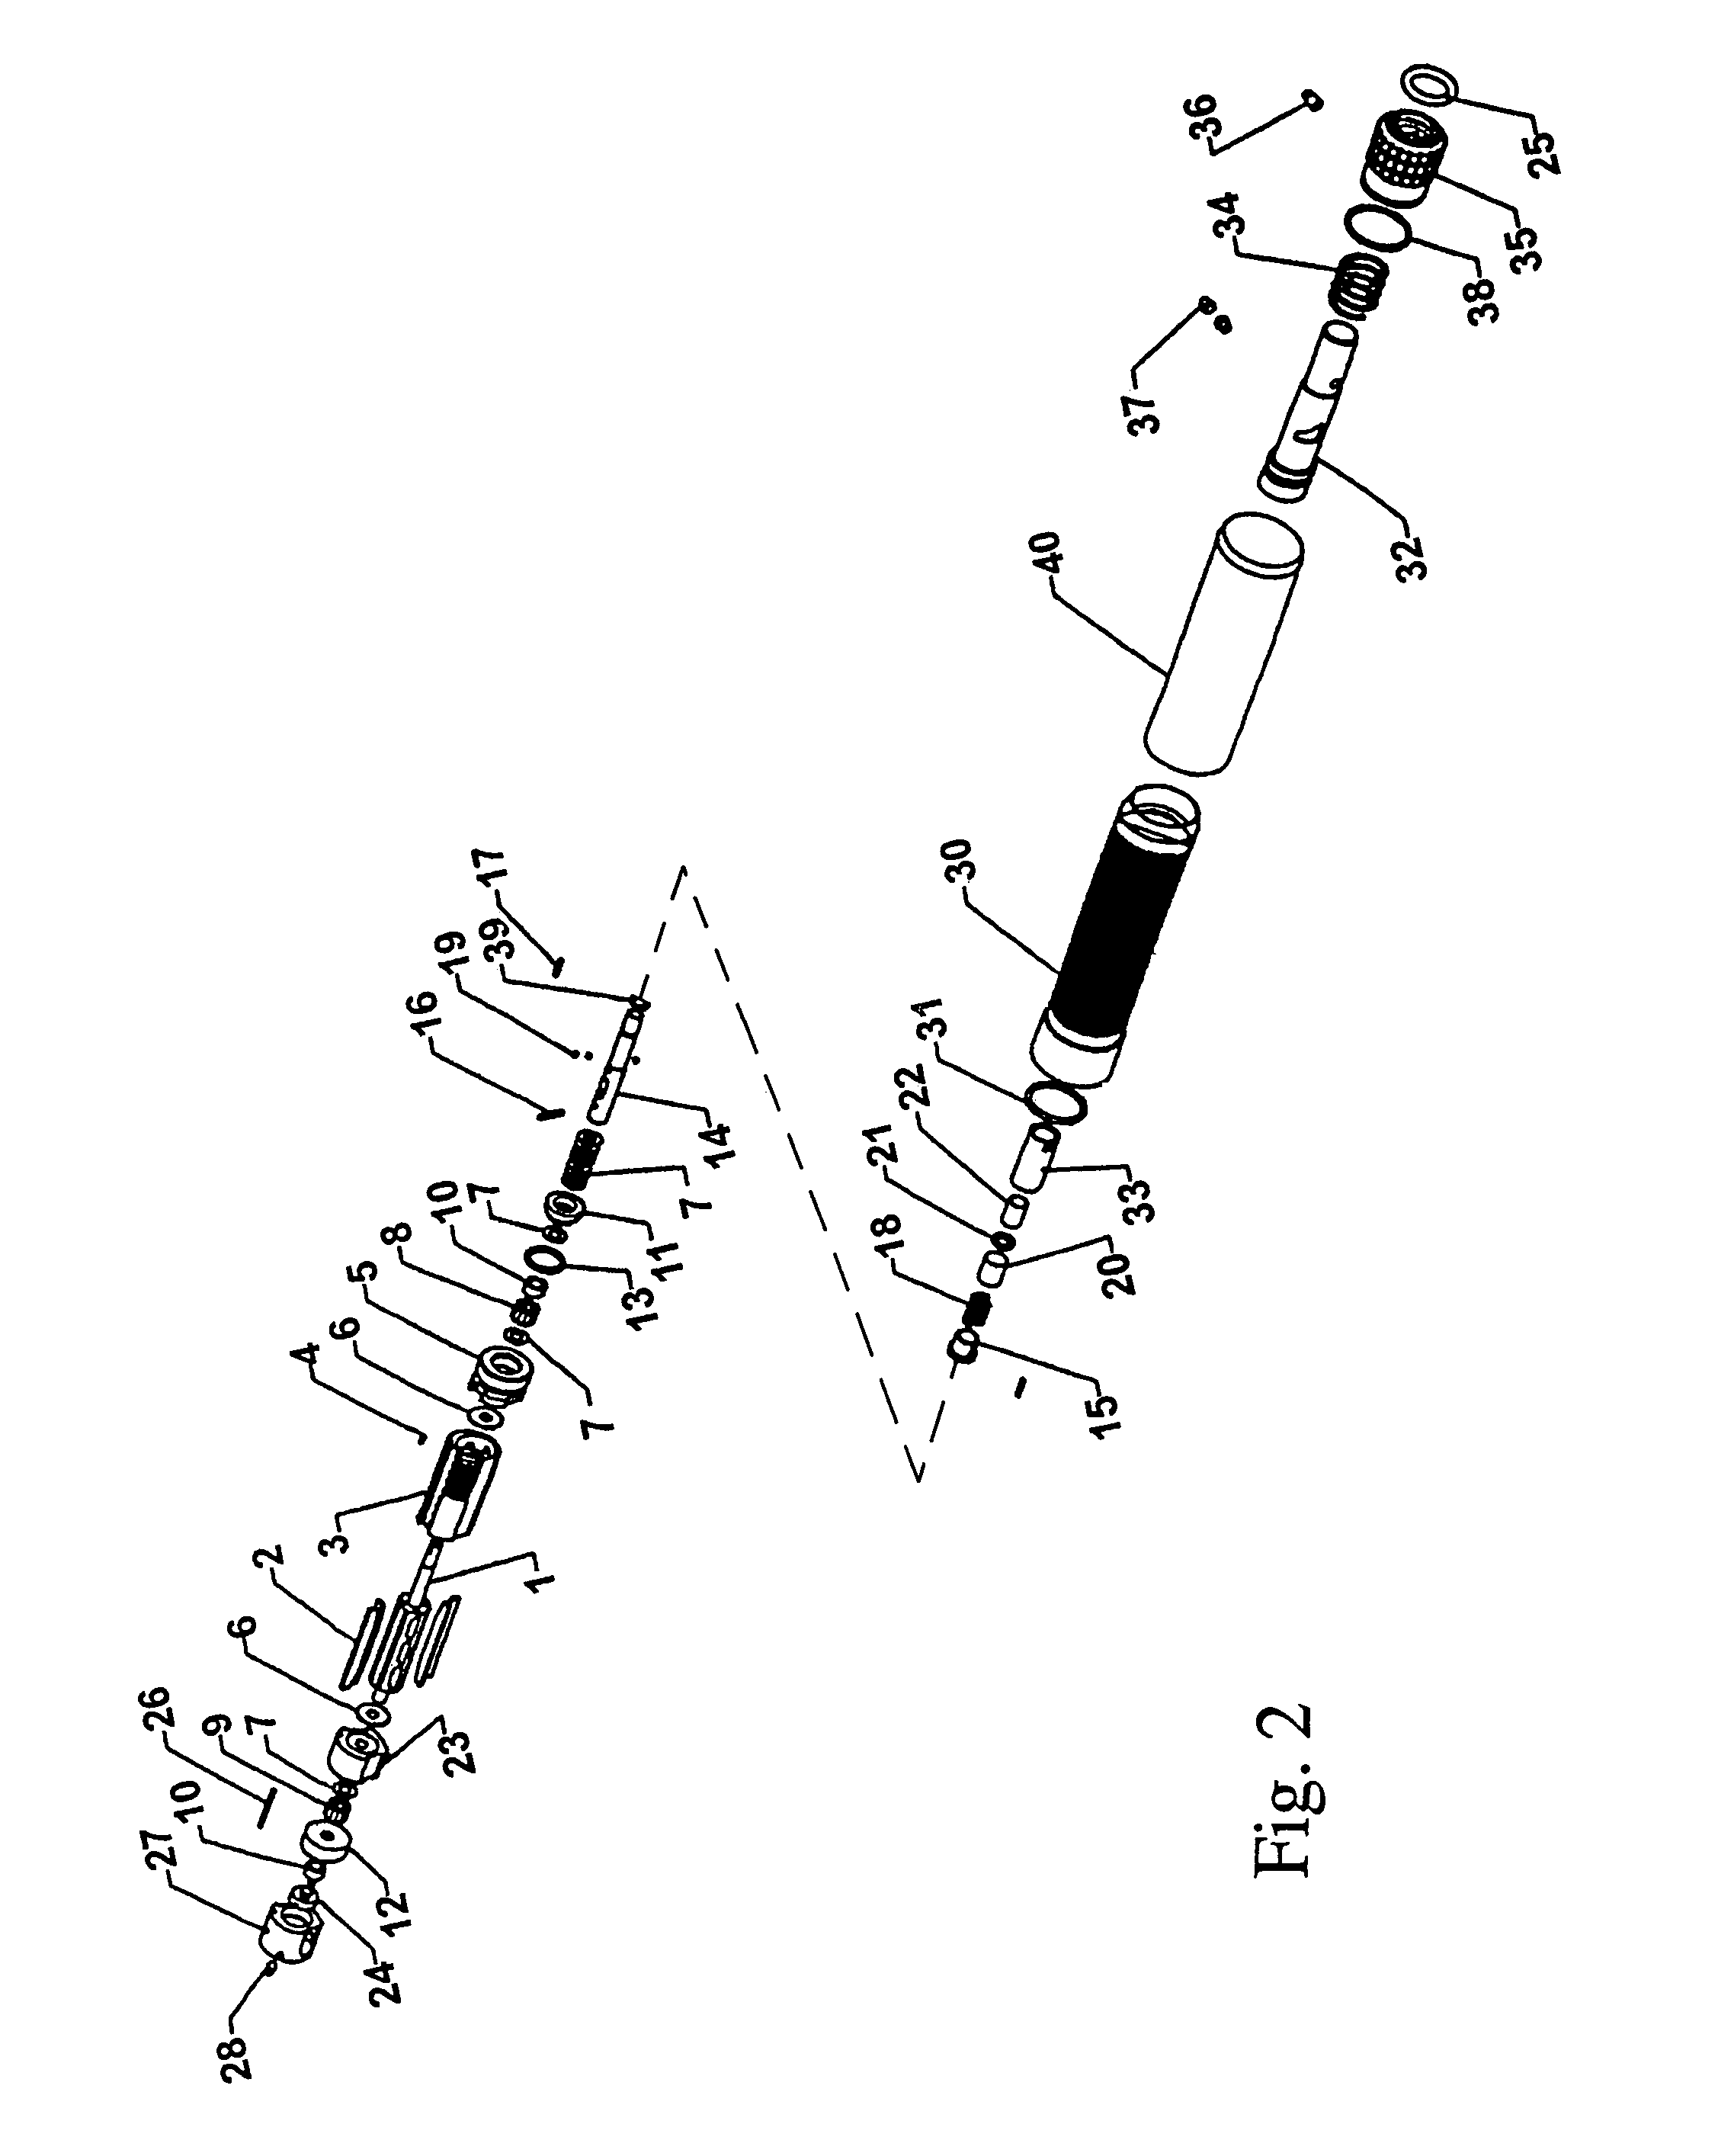 Surgical pneumatic motor for use with MRI